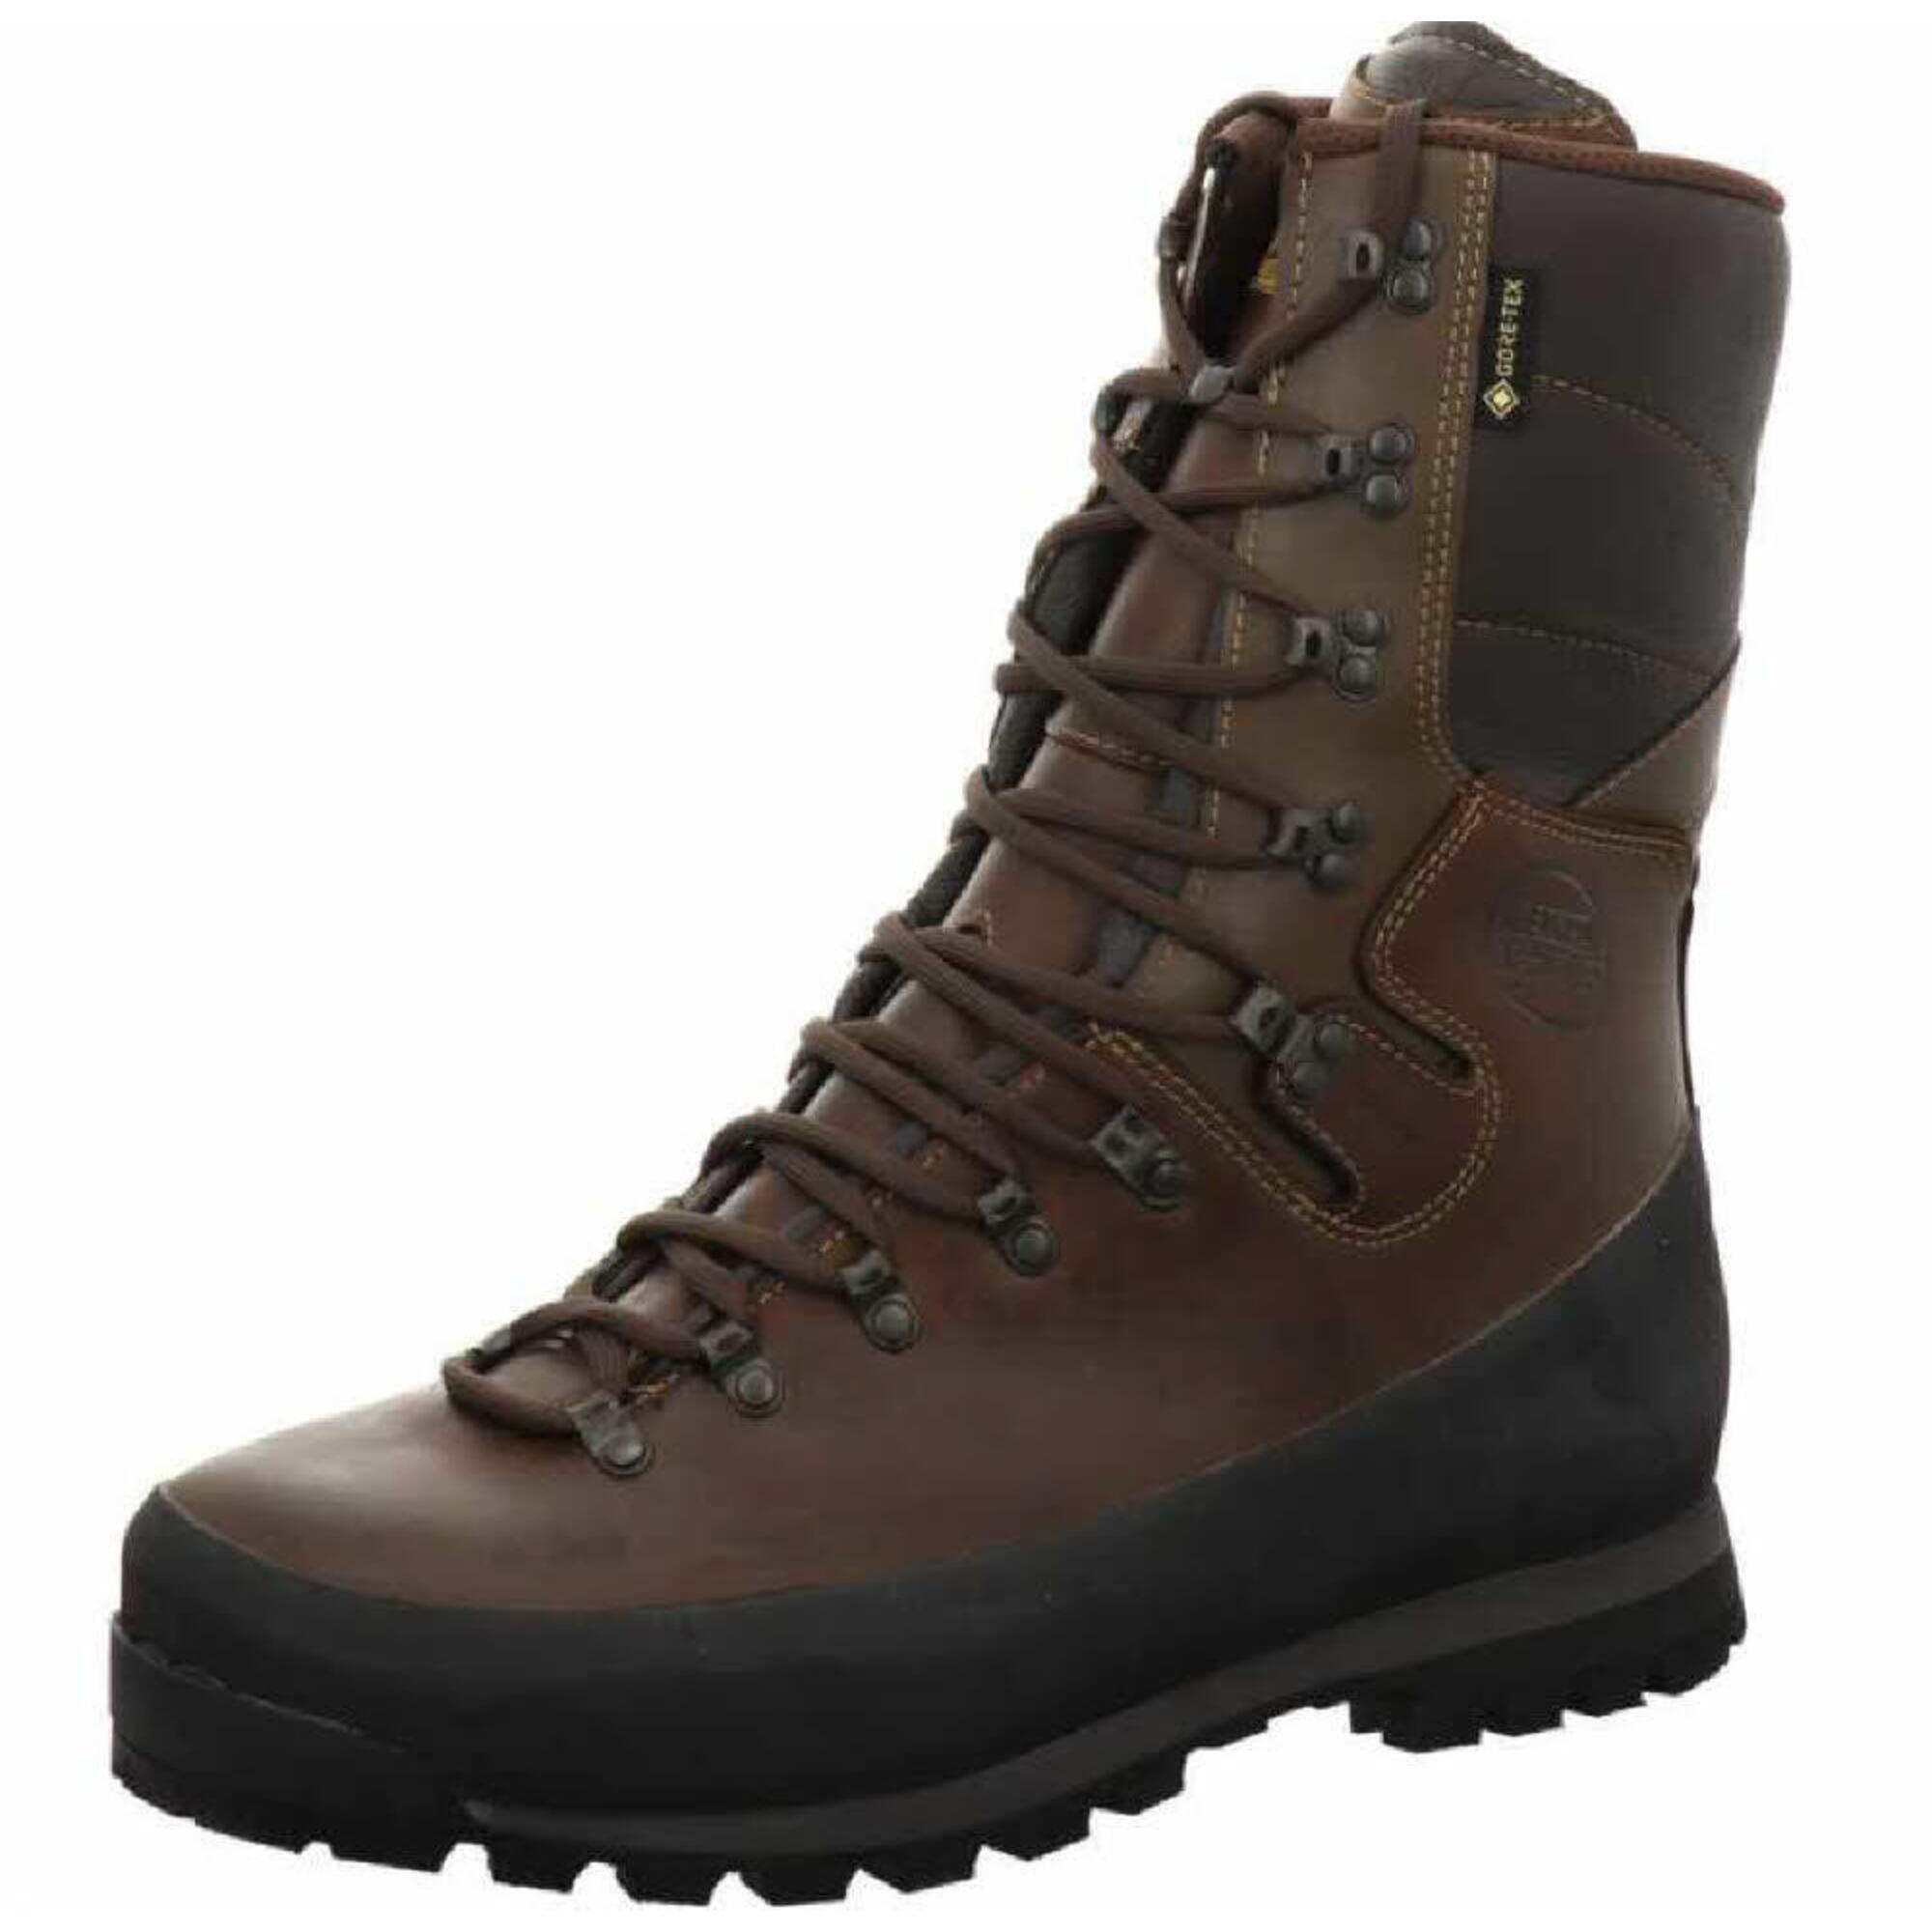 Meindl Dovre Extreme GTX - Wide Field Boots UK 10 1/6